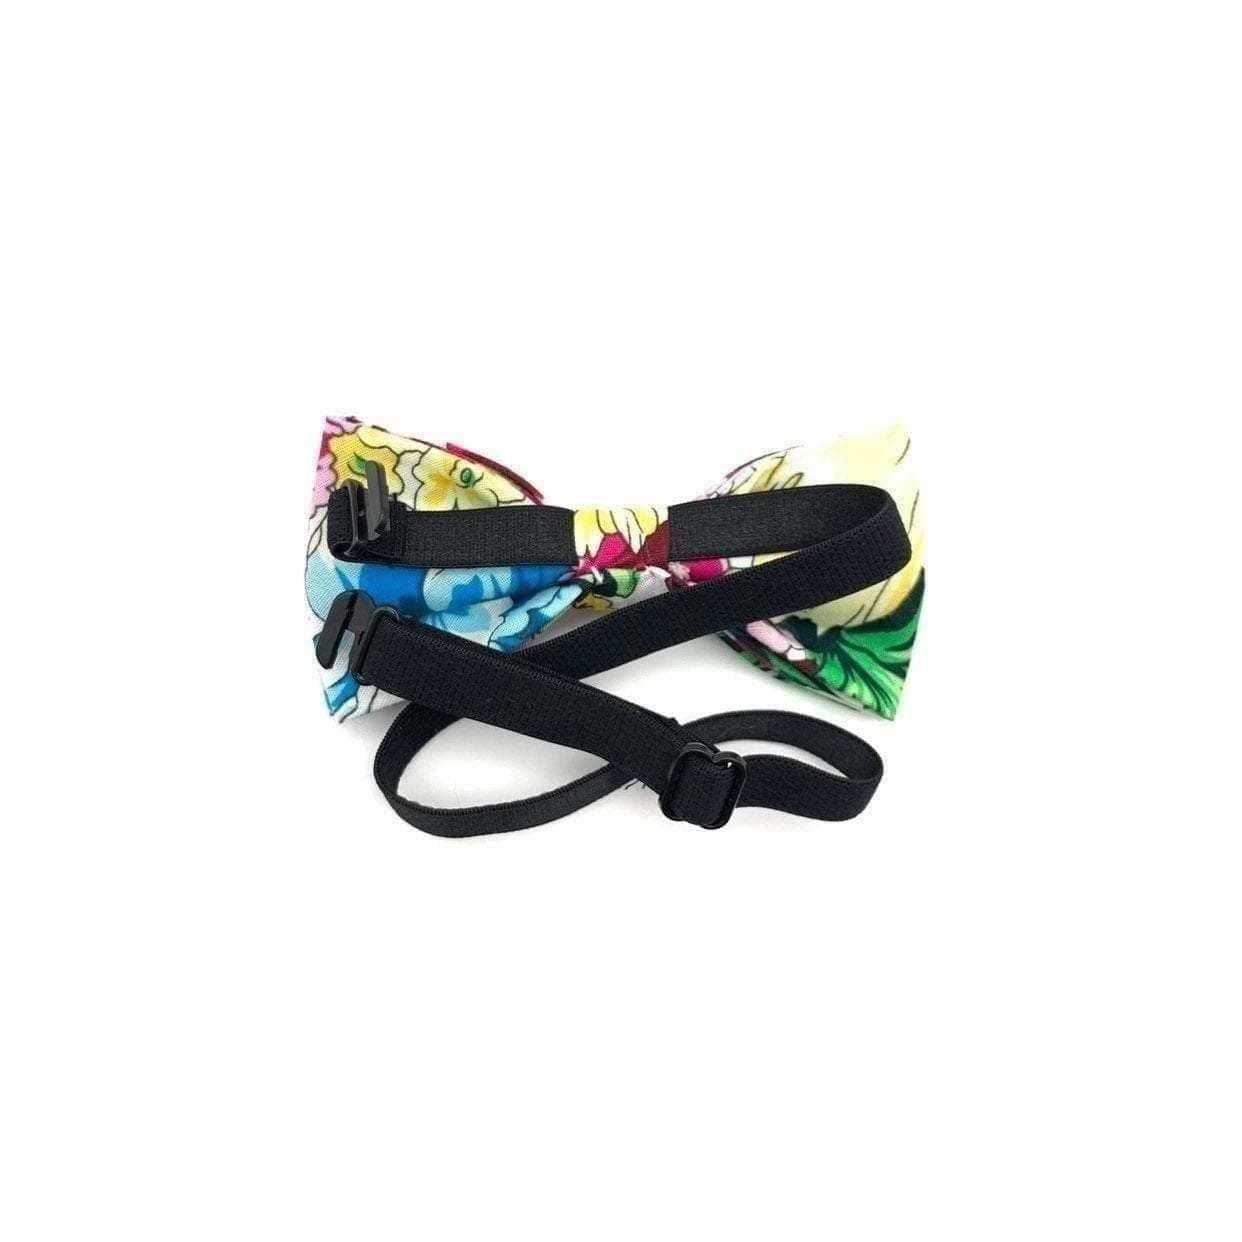 Kids Floral Pre-Tied Bow Tie Mytieshop - BYRON-The perfect accessory for your little one&#39;s next formal event, this BYRON Kids Floral Pre-Tied Bow Tie is sure to make them look dapper. Made from high-quality materials, this bow tie features a beautiful floral design that is perfect for spring and summer occasions. The pre-tied design makes it easy to put on and take off, so your little one can focus on enjoying their special day. Strap is adjustablePre-Tied bowtieBow Tie 10.5 * 6CMSpecificsItem T